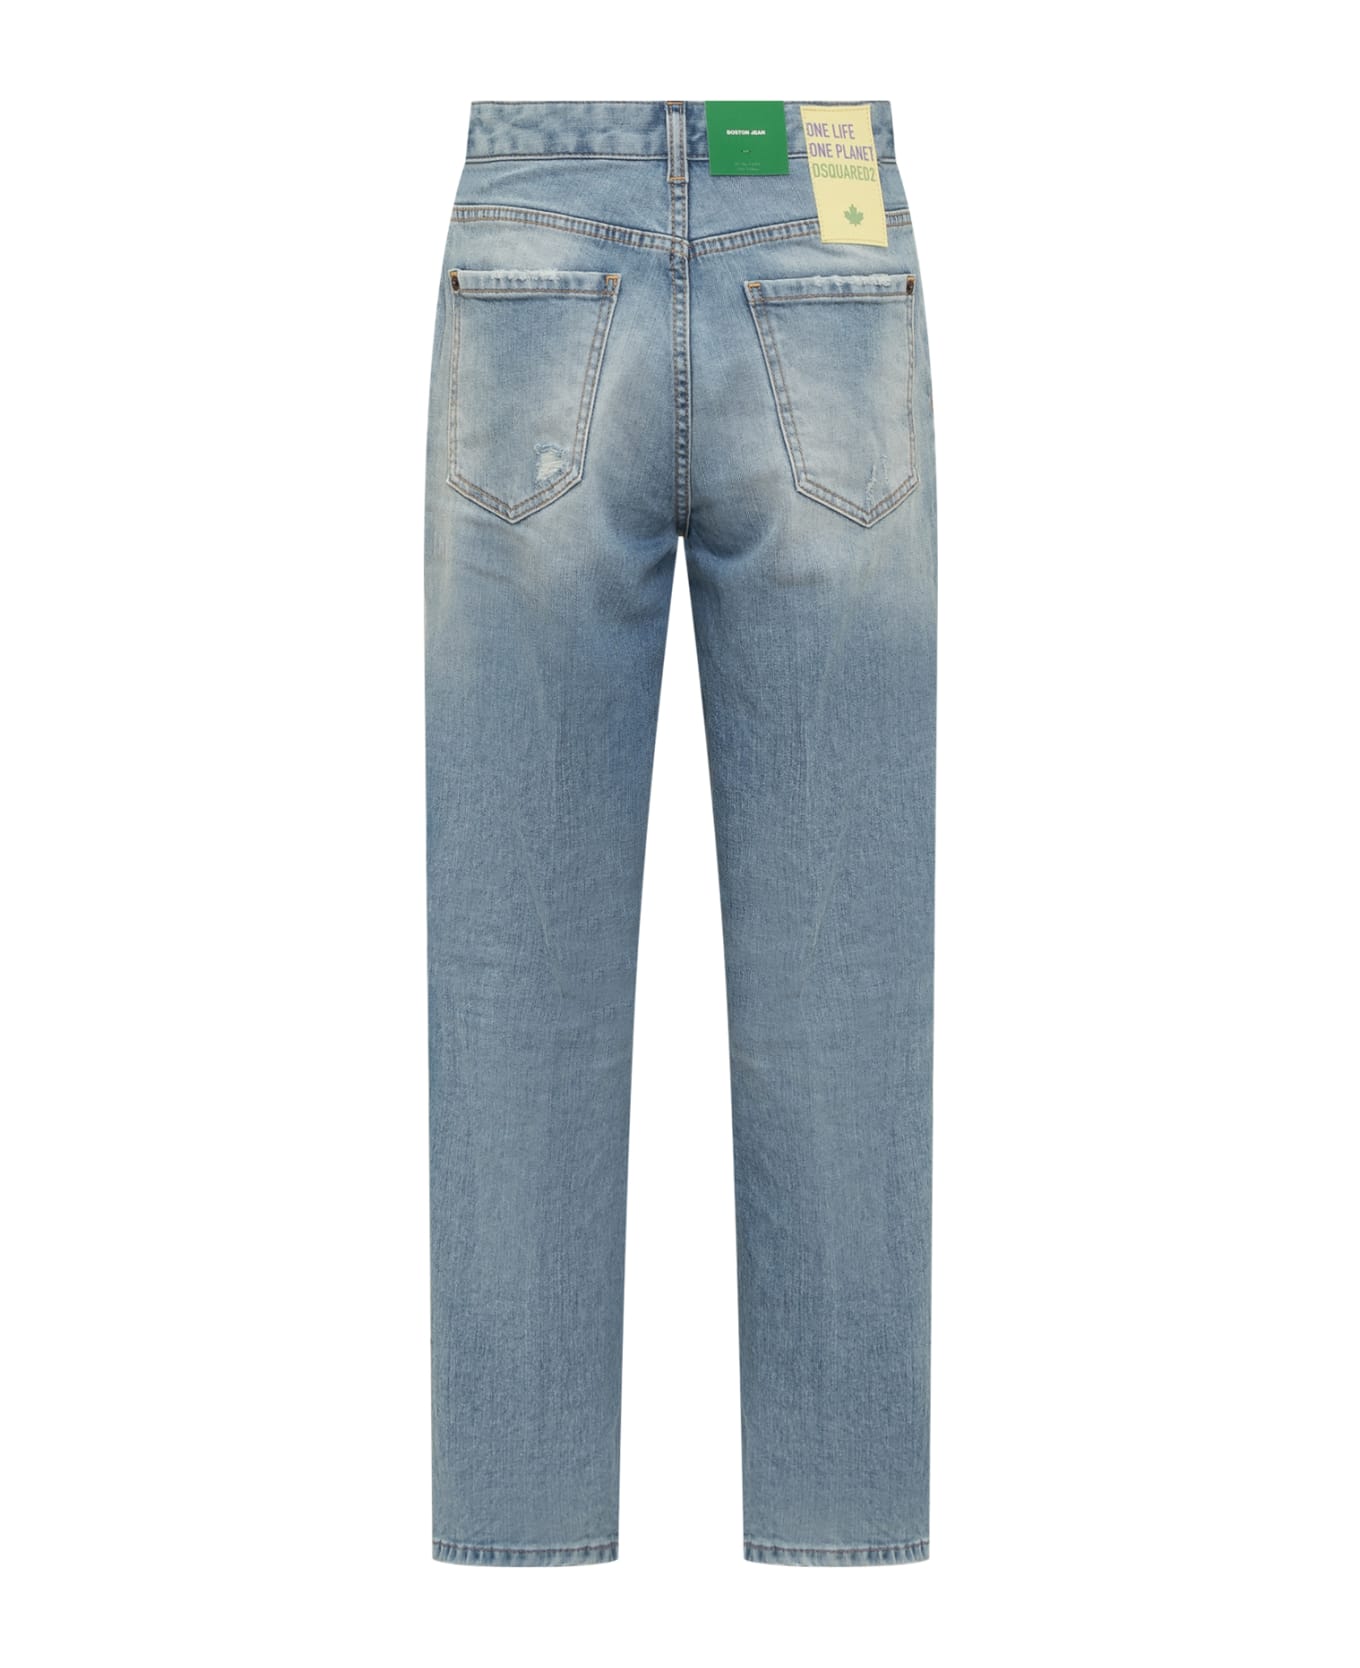 Dsquared2 One Life One Planet Boston Jeans - NAVY BLUE デニム